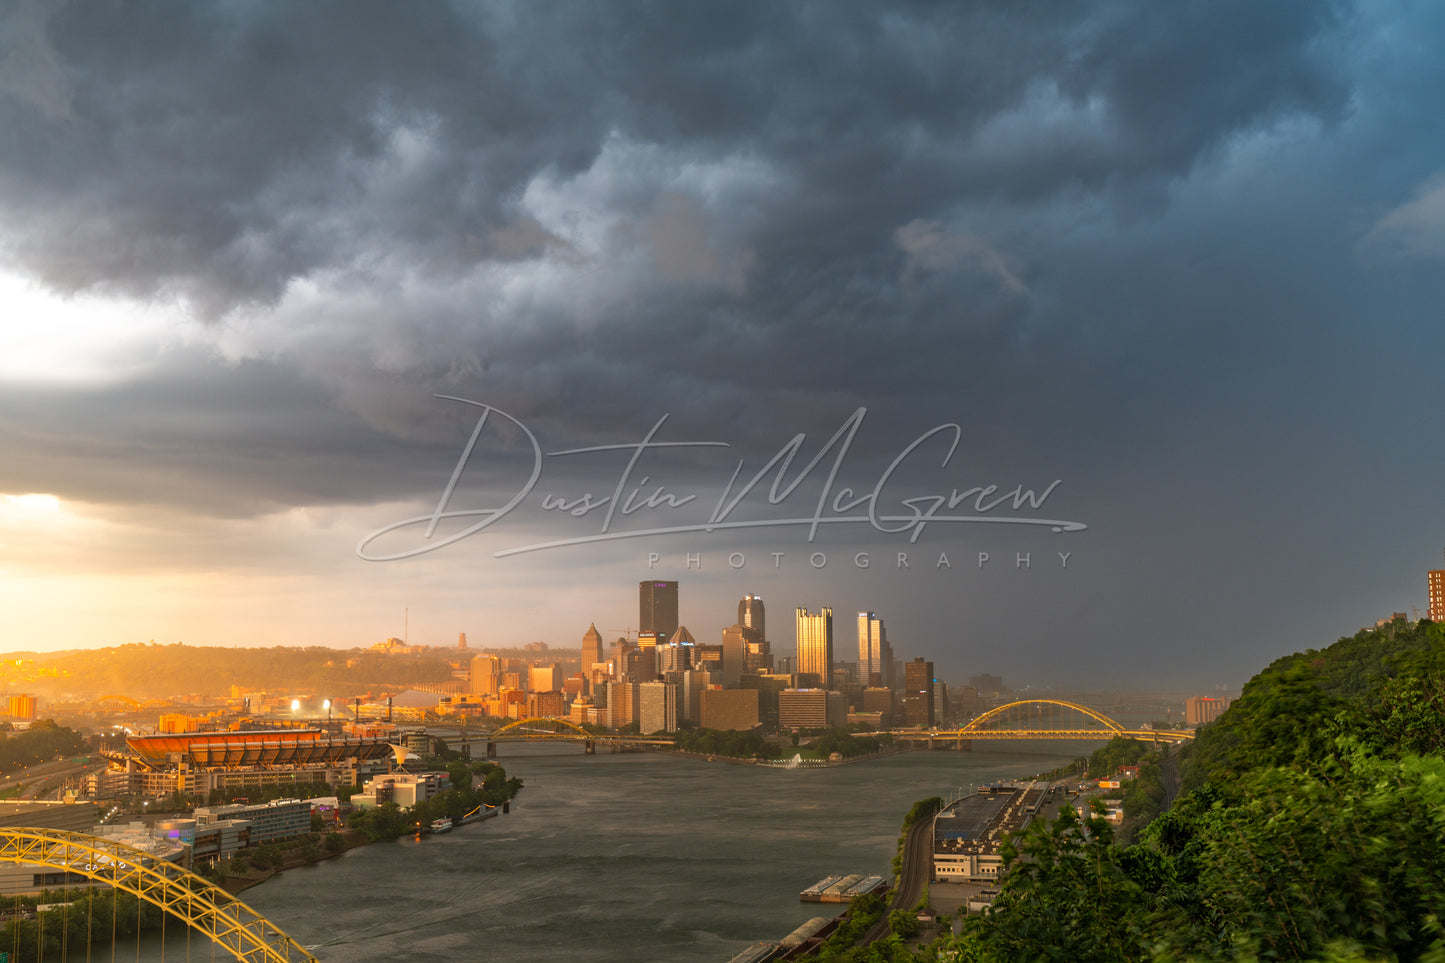 Pittsburgh Golden Triangle Thunderstorm